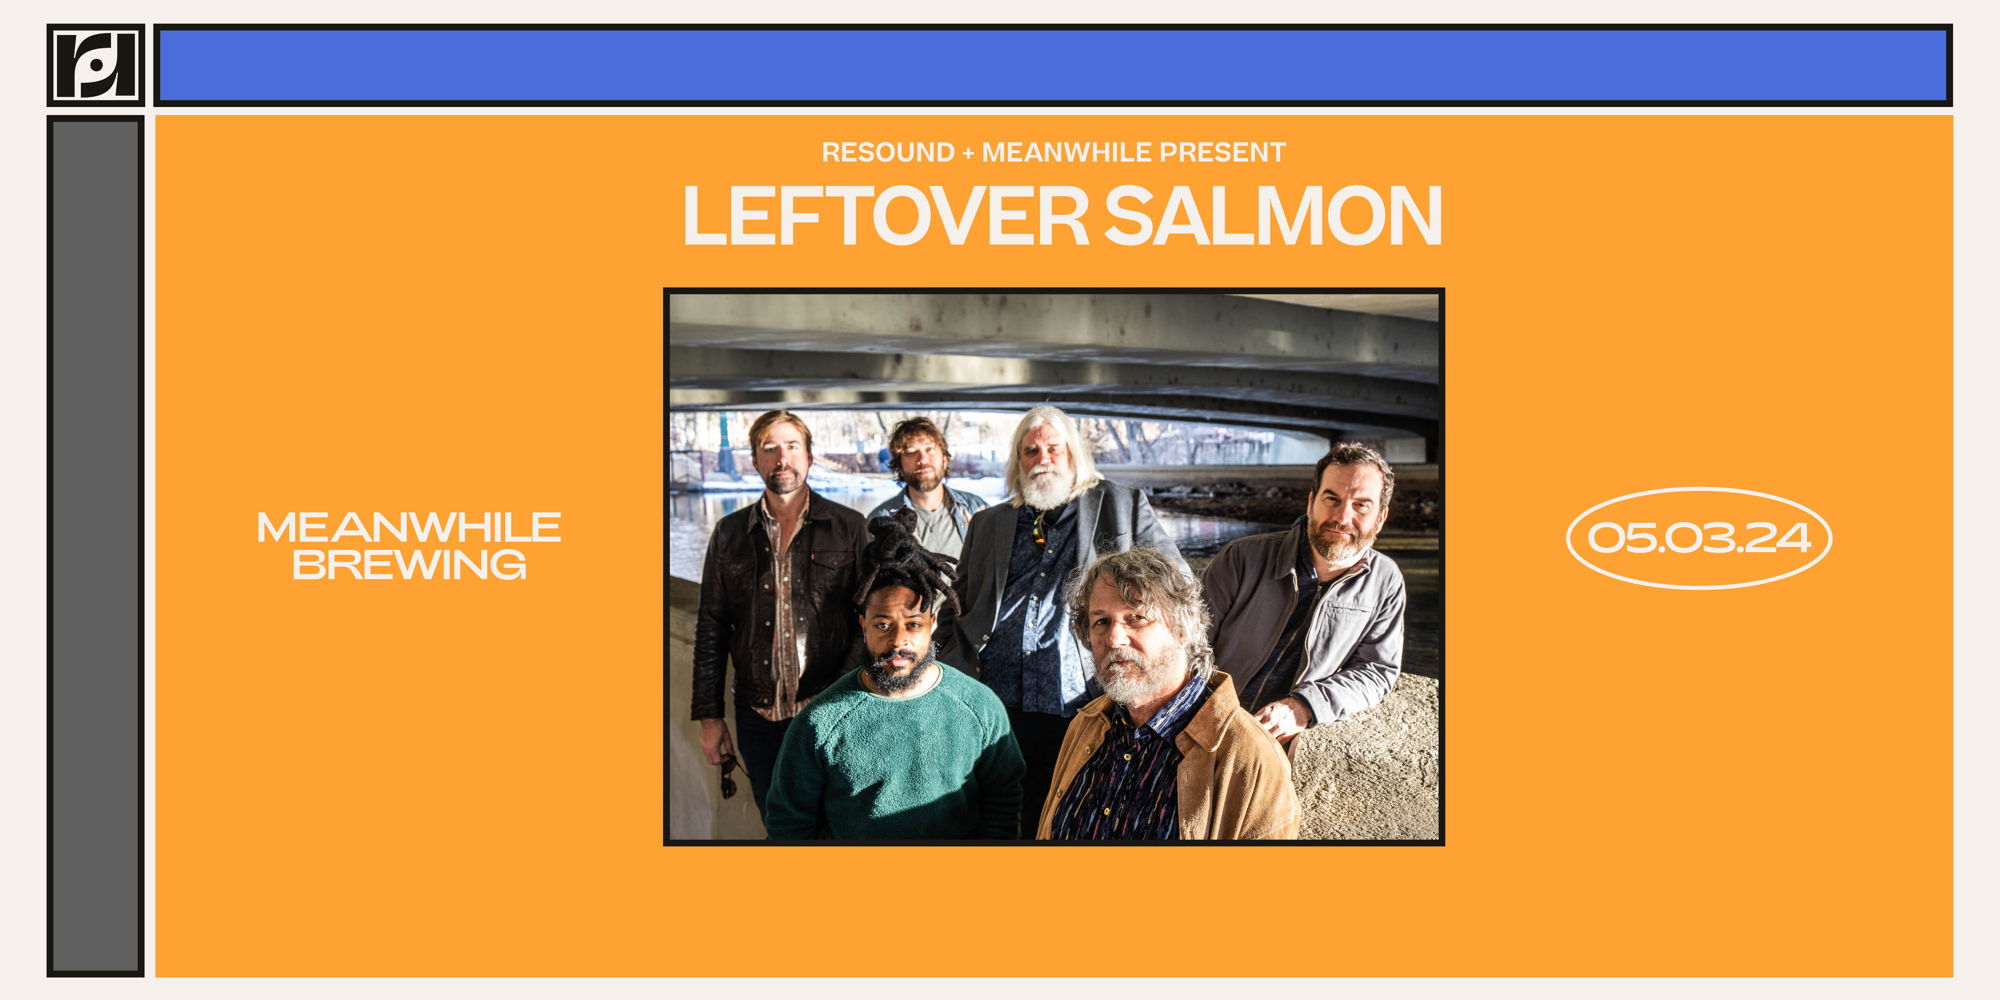 Resound & Meanwhile Present: Leftover Salmon at Meanwhile Brewing promotional image